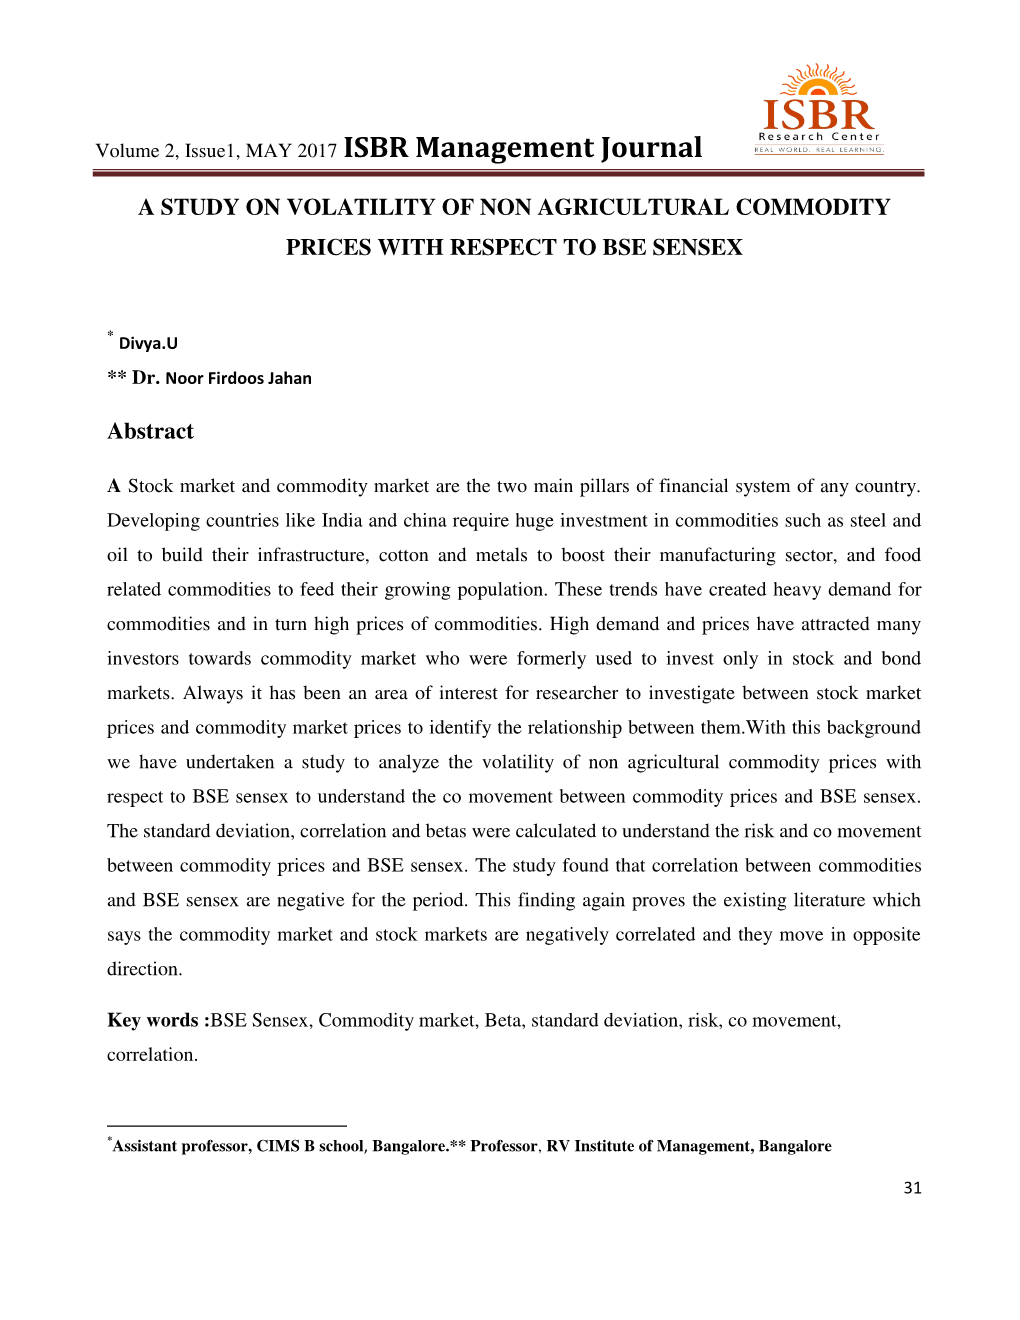 A Study on Volatility of Non Agricultural Commodity Prices with Respect to Bse Sensex